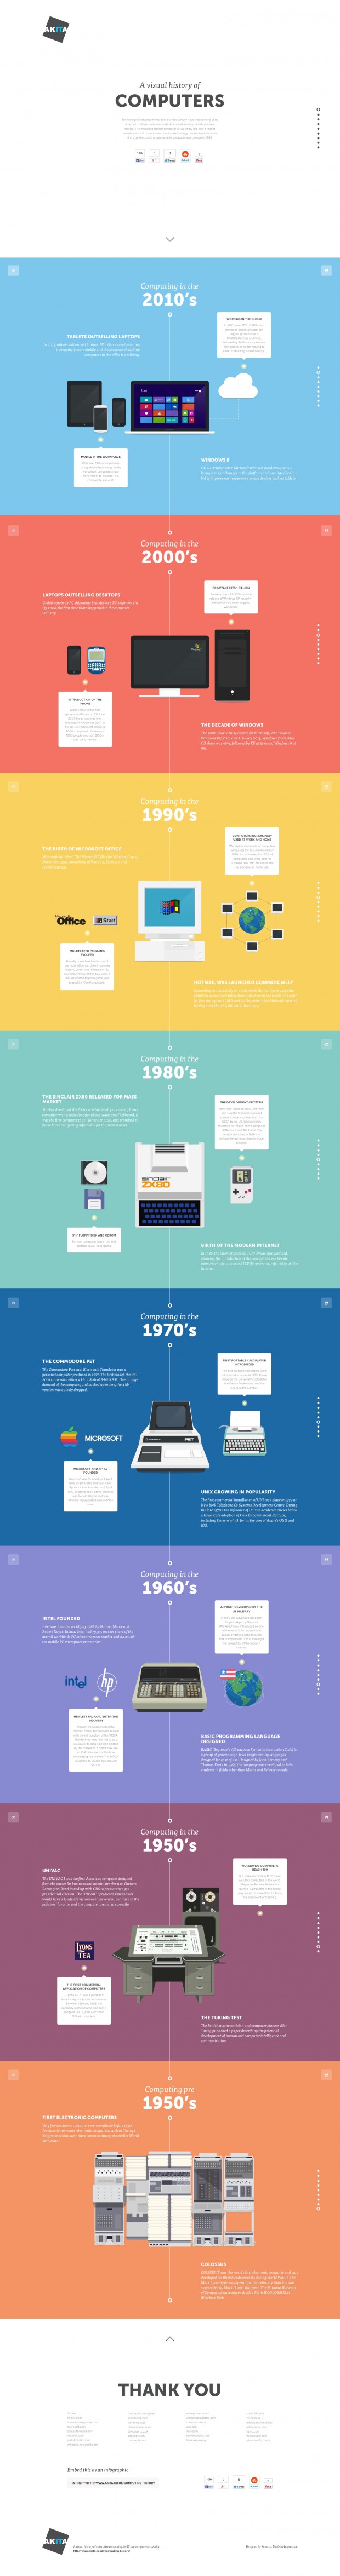 history-of-computers